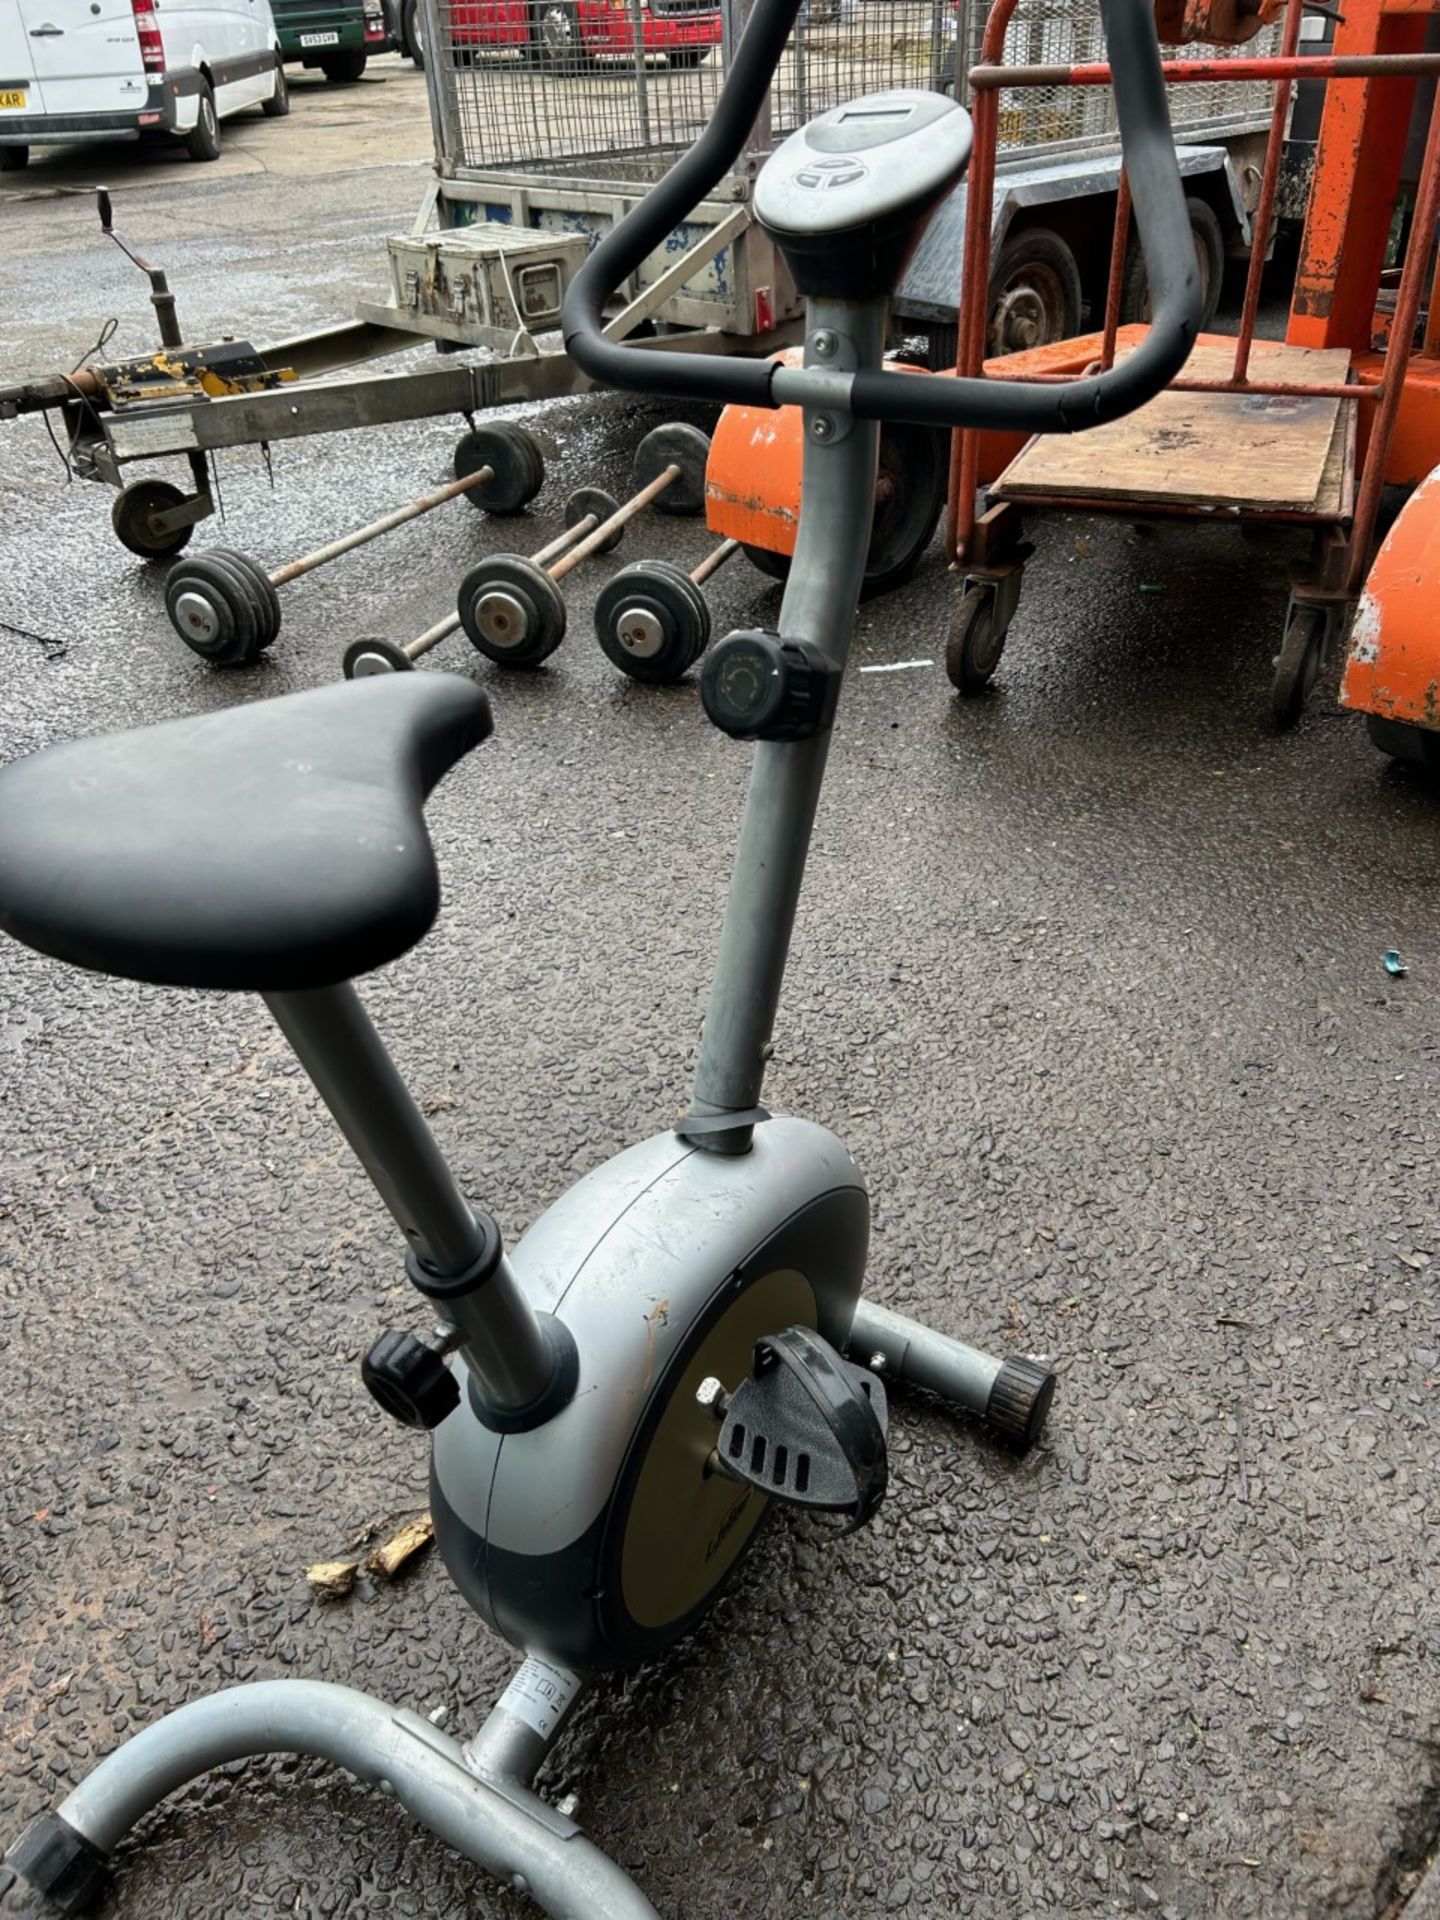 Small lifegear exercise bike. Good for house or garage. Used and average condition. Needs new - Image 4 of 4